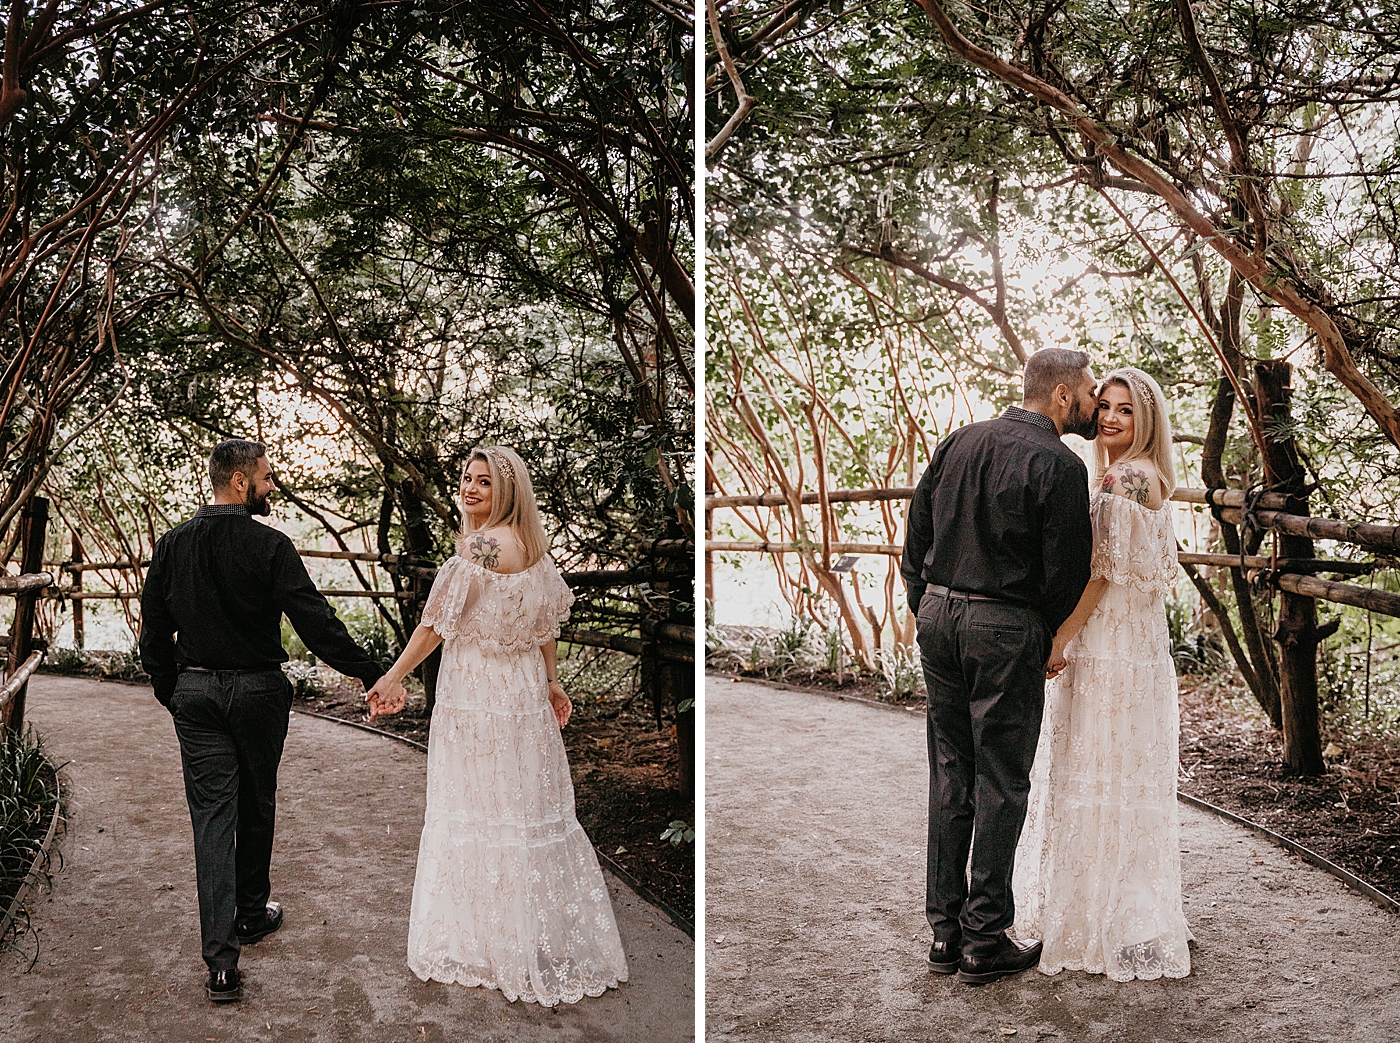 Couple walking through tree path Morikami Museum and Japanese Gardens Engagement Photography captured by Krystal Capone Photography